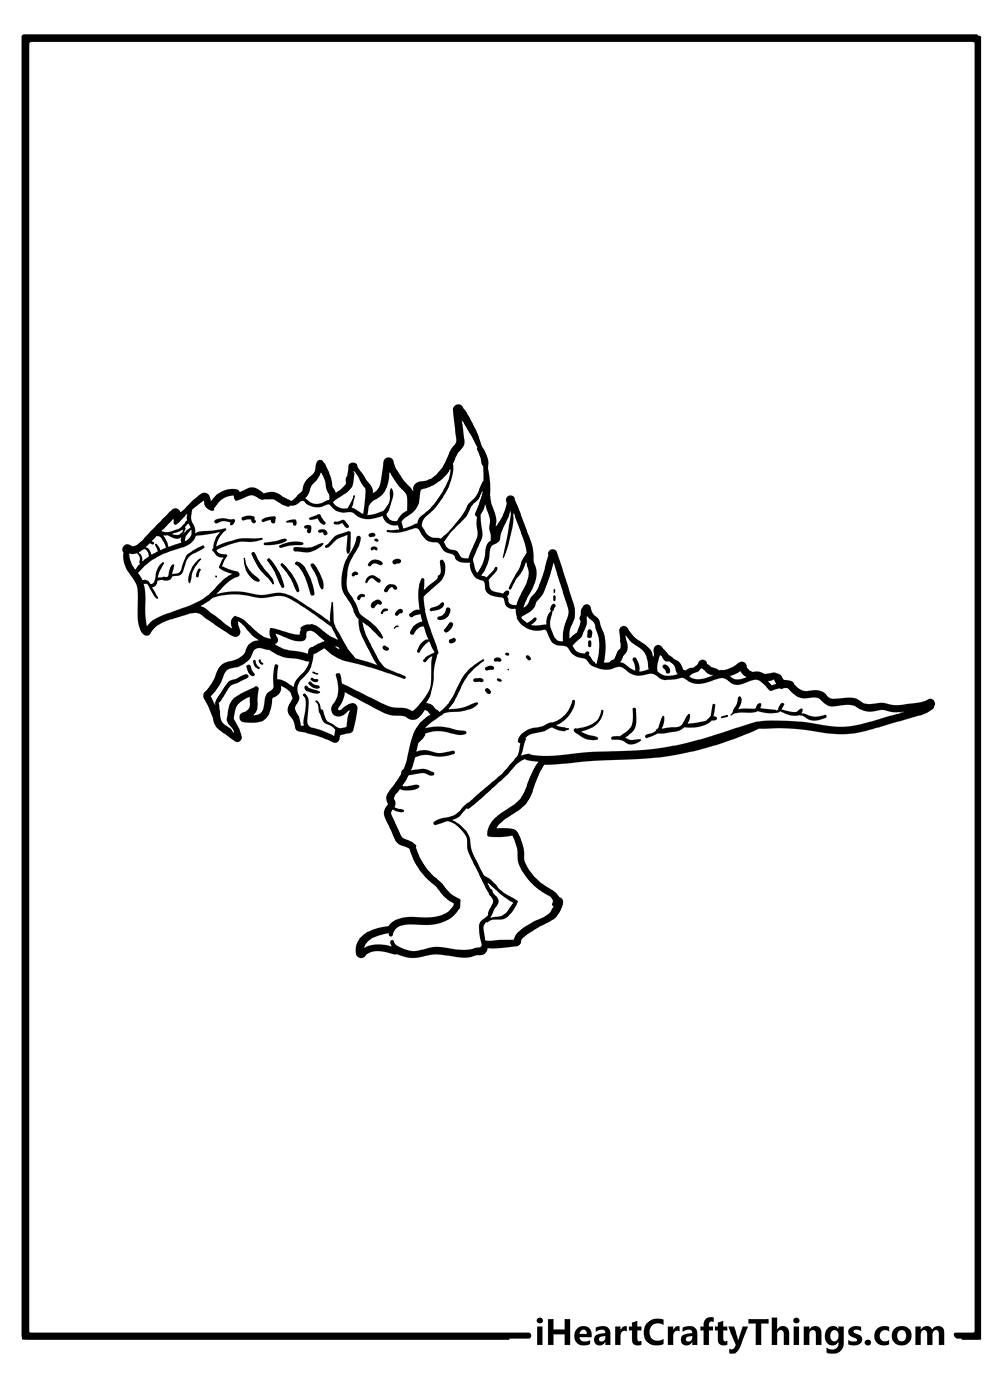 Godzilla Coloring Book for kids free printable